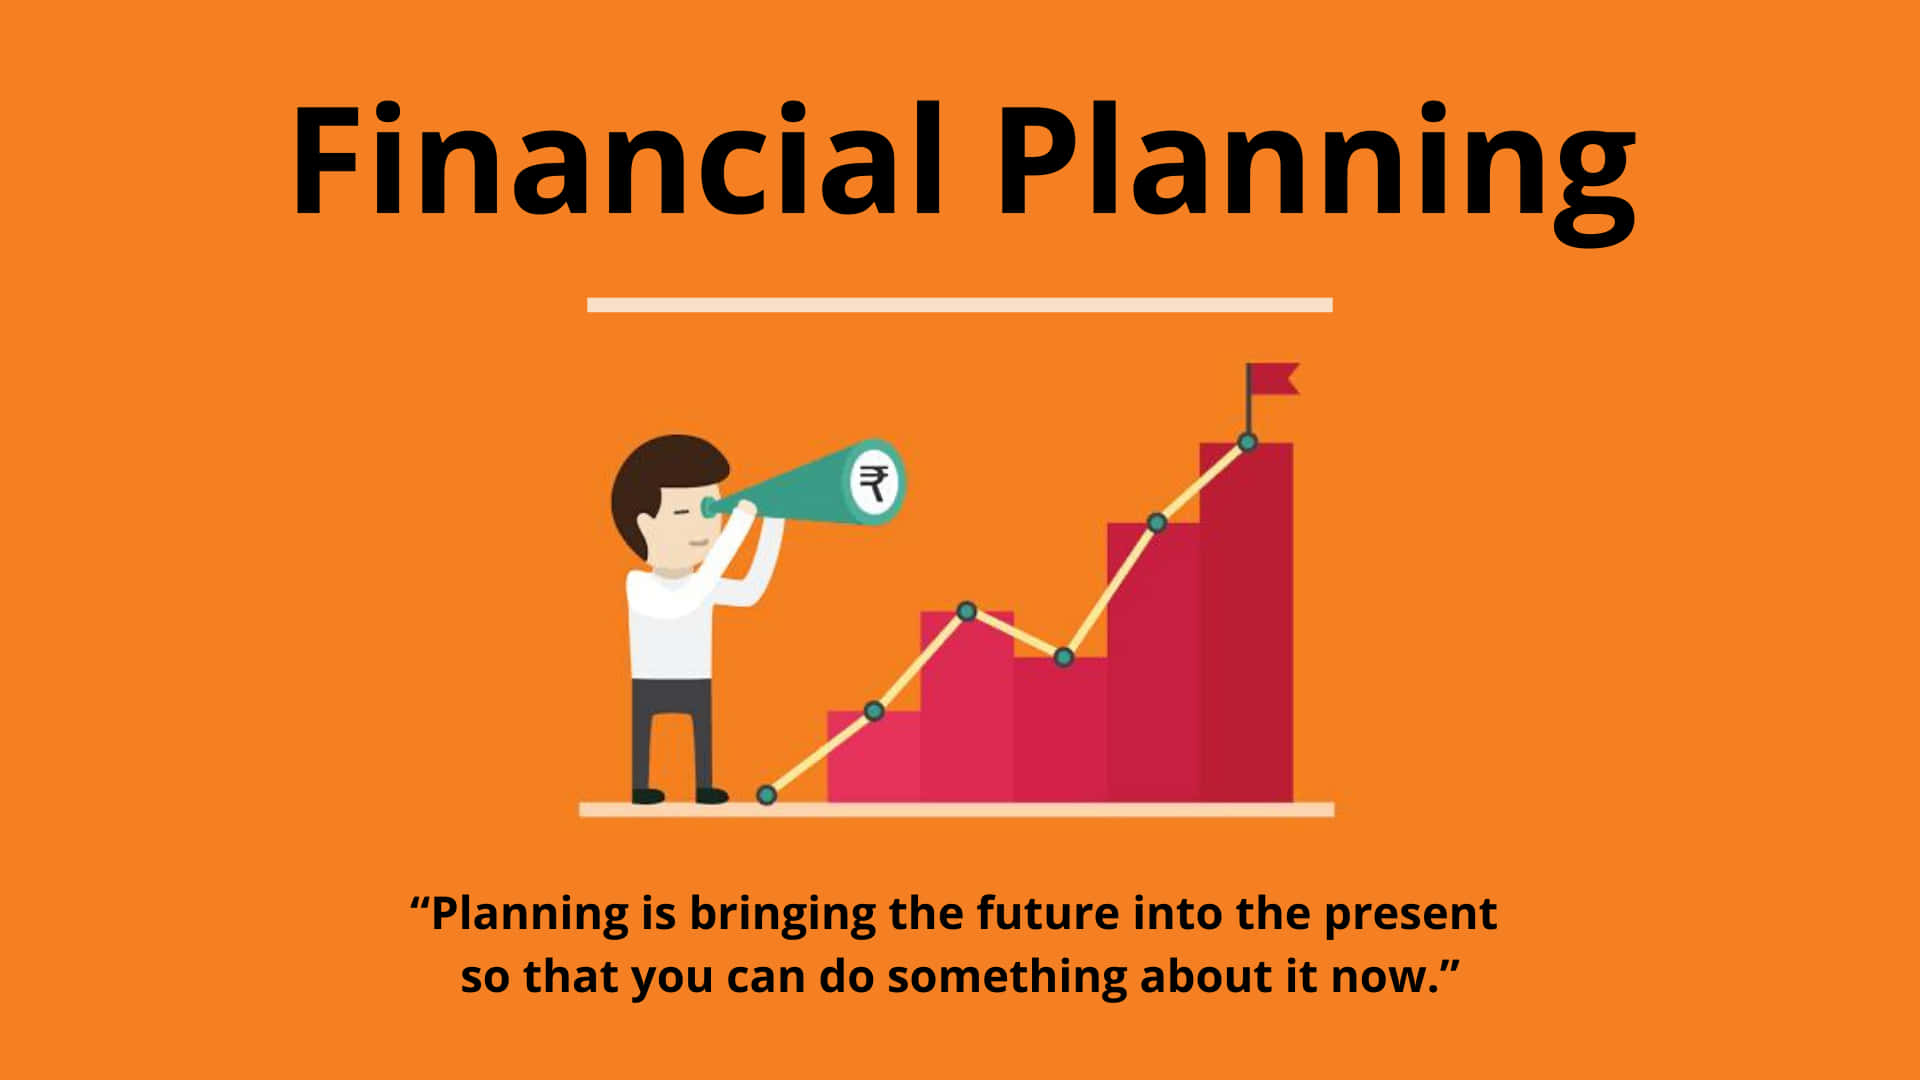 Financial Planning Is Bringing The Future Present So You Can Do Something